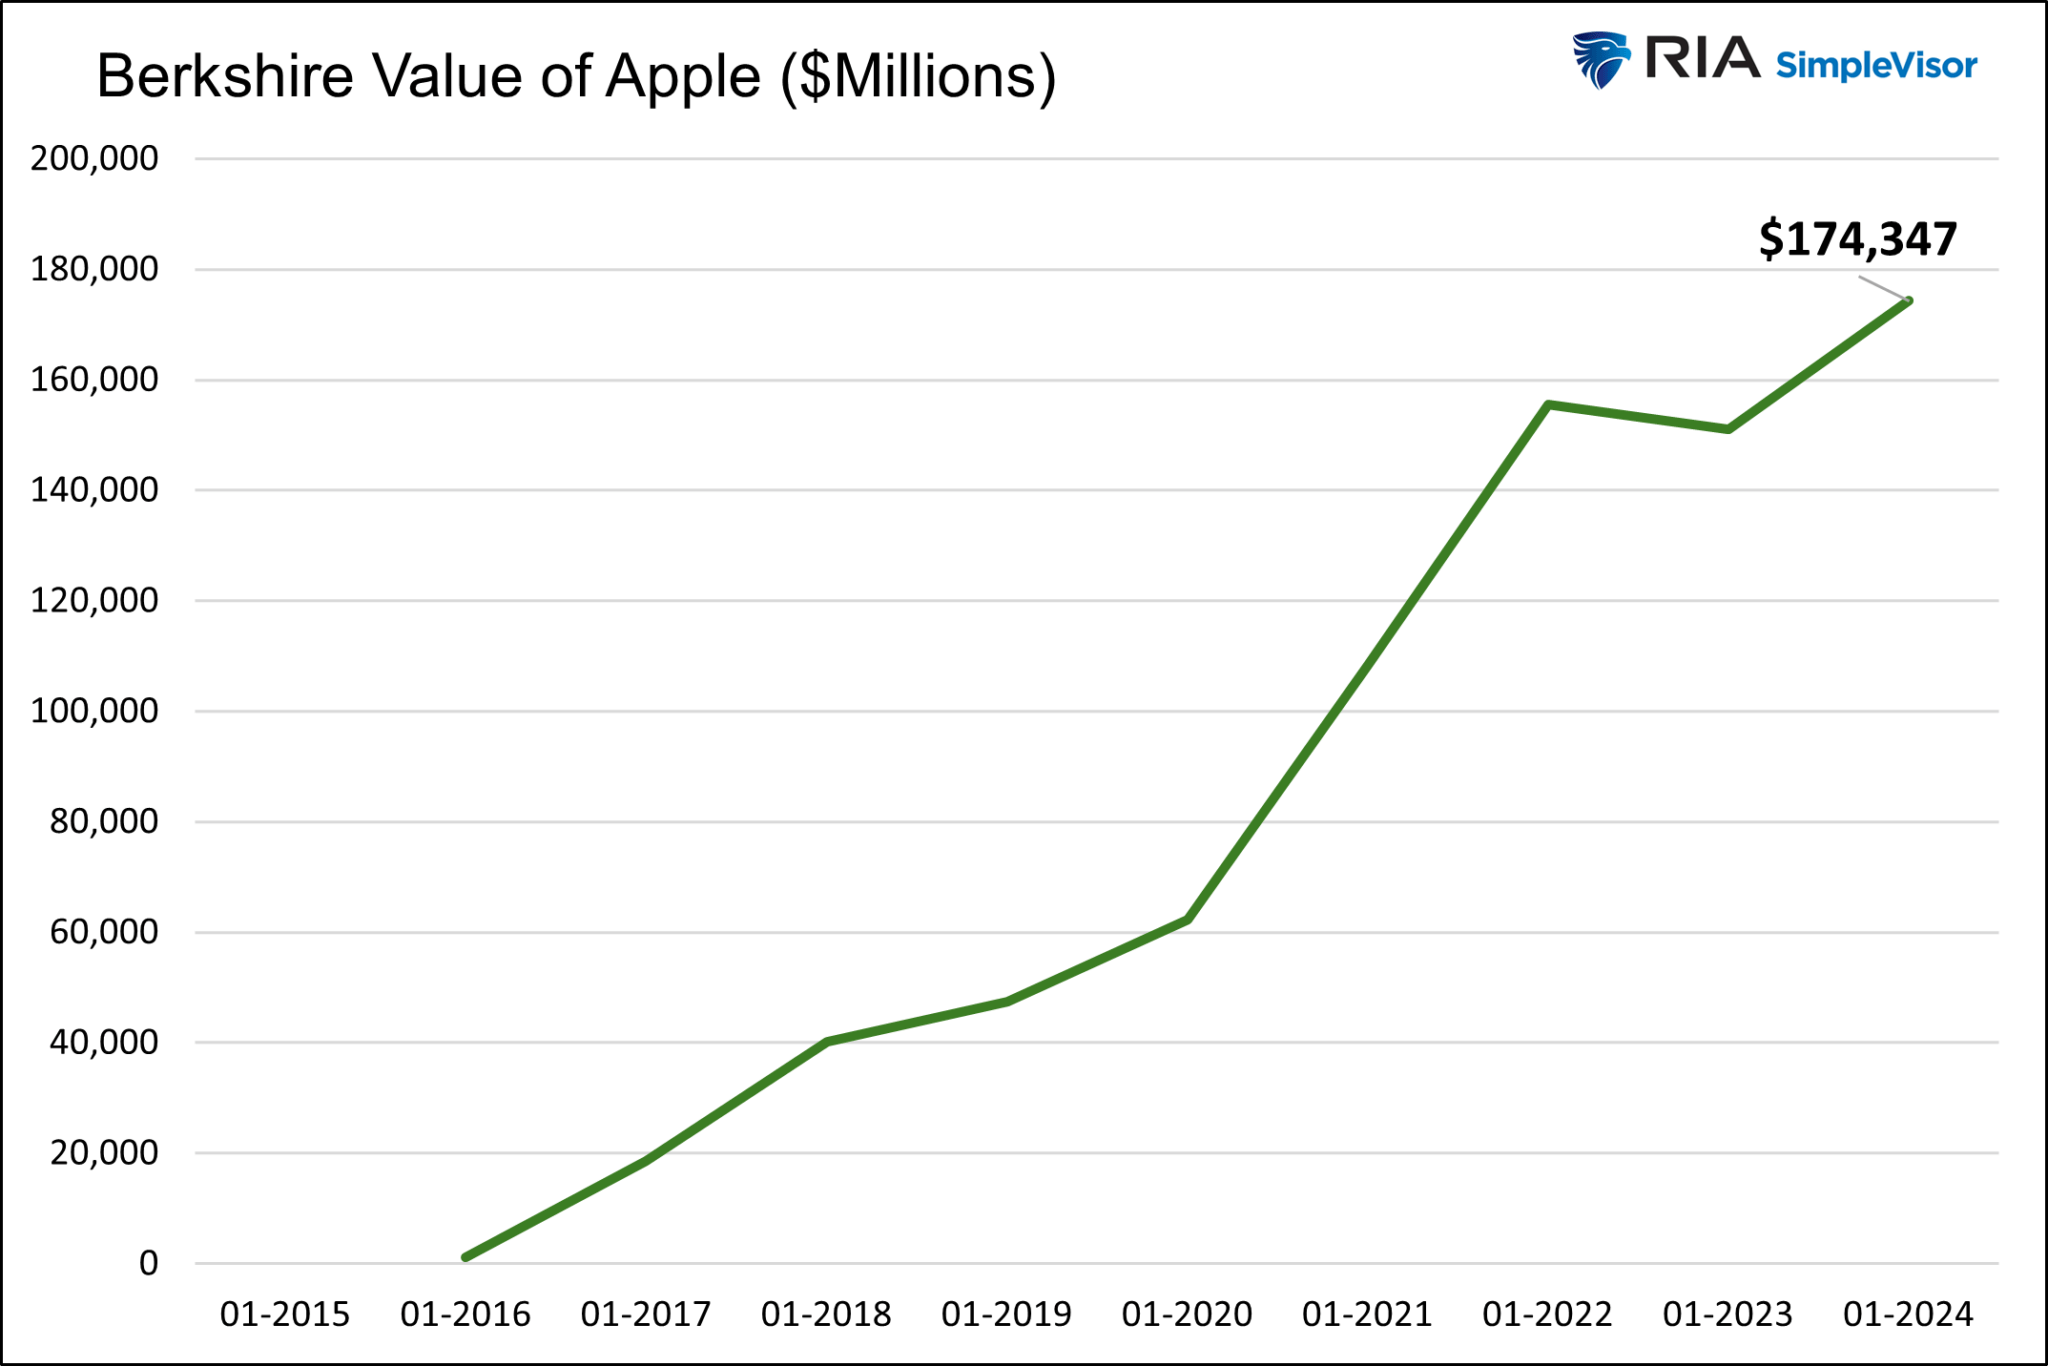 Berkshire Value of Its Apple Holdings